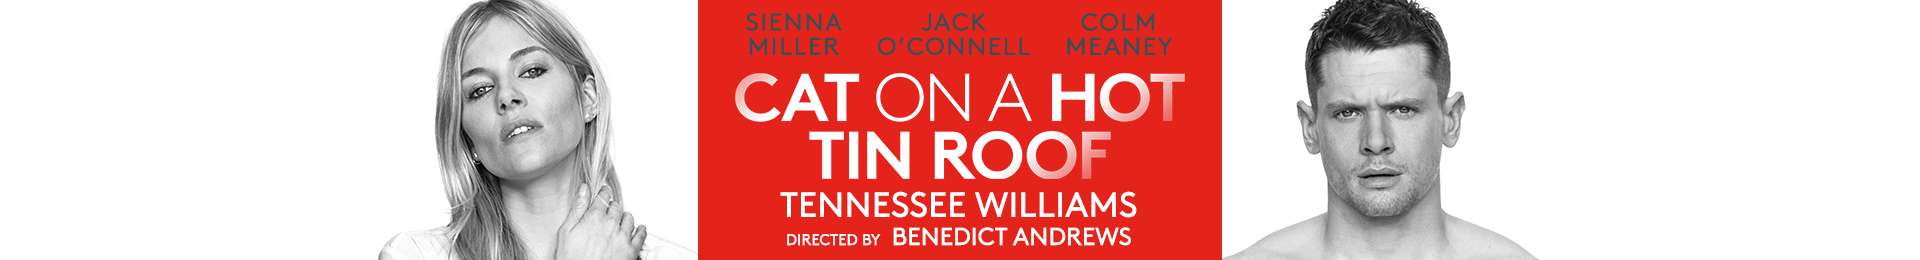 Cat On A Hot Tin Roof tickets